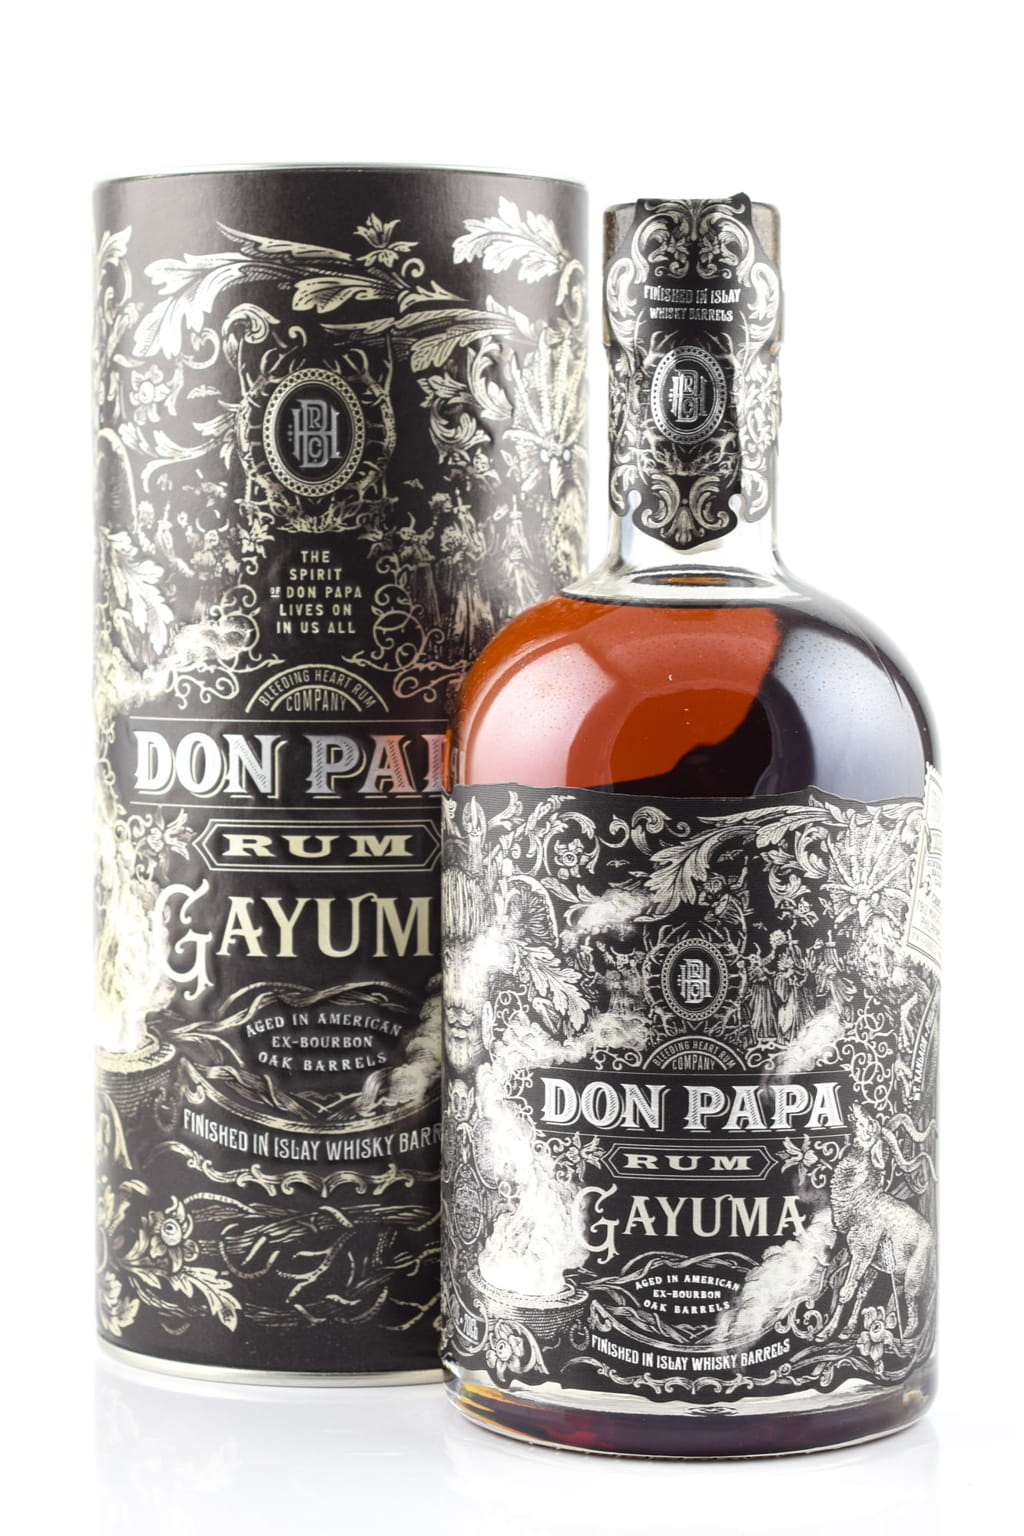 Don Papa MassKara limited edition for those who love sweet rums